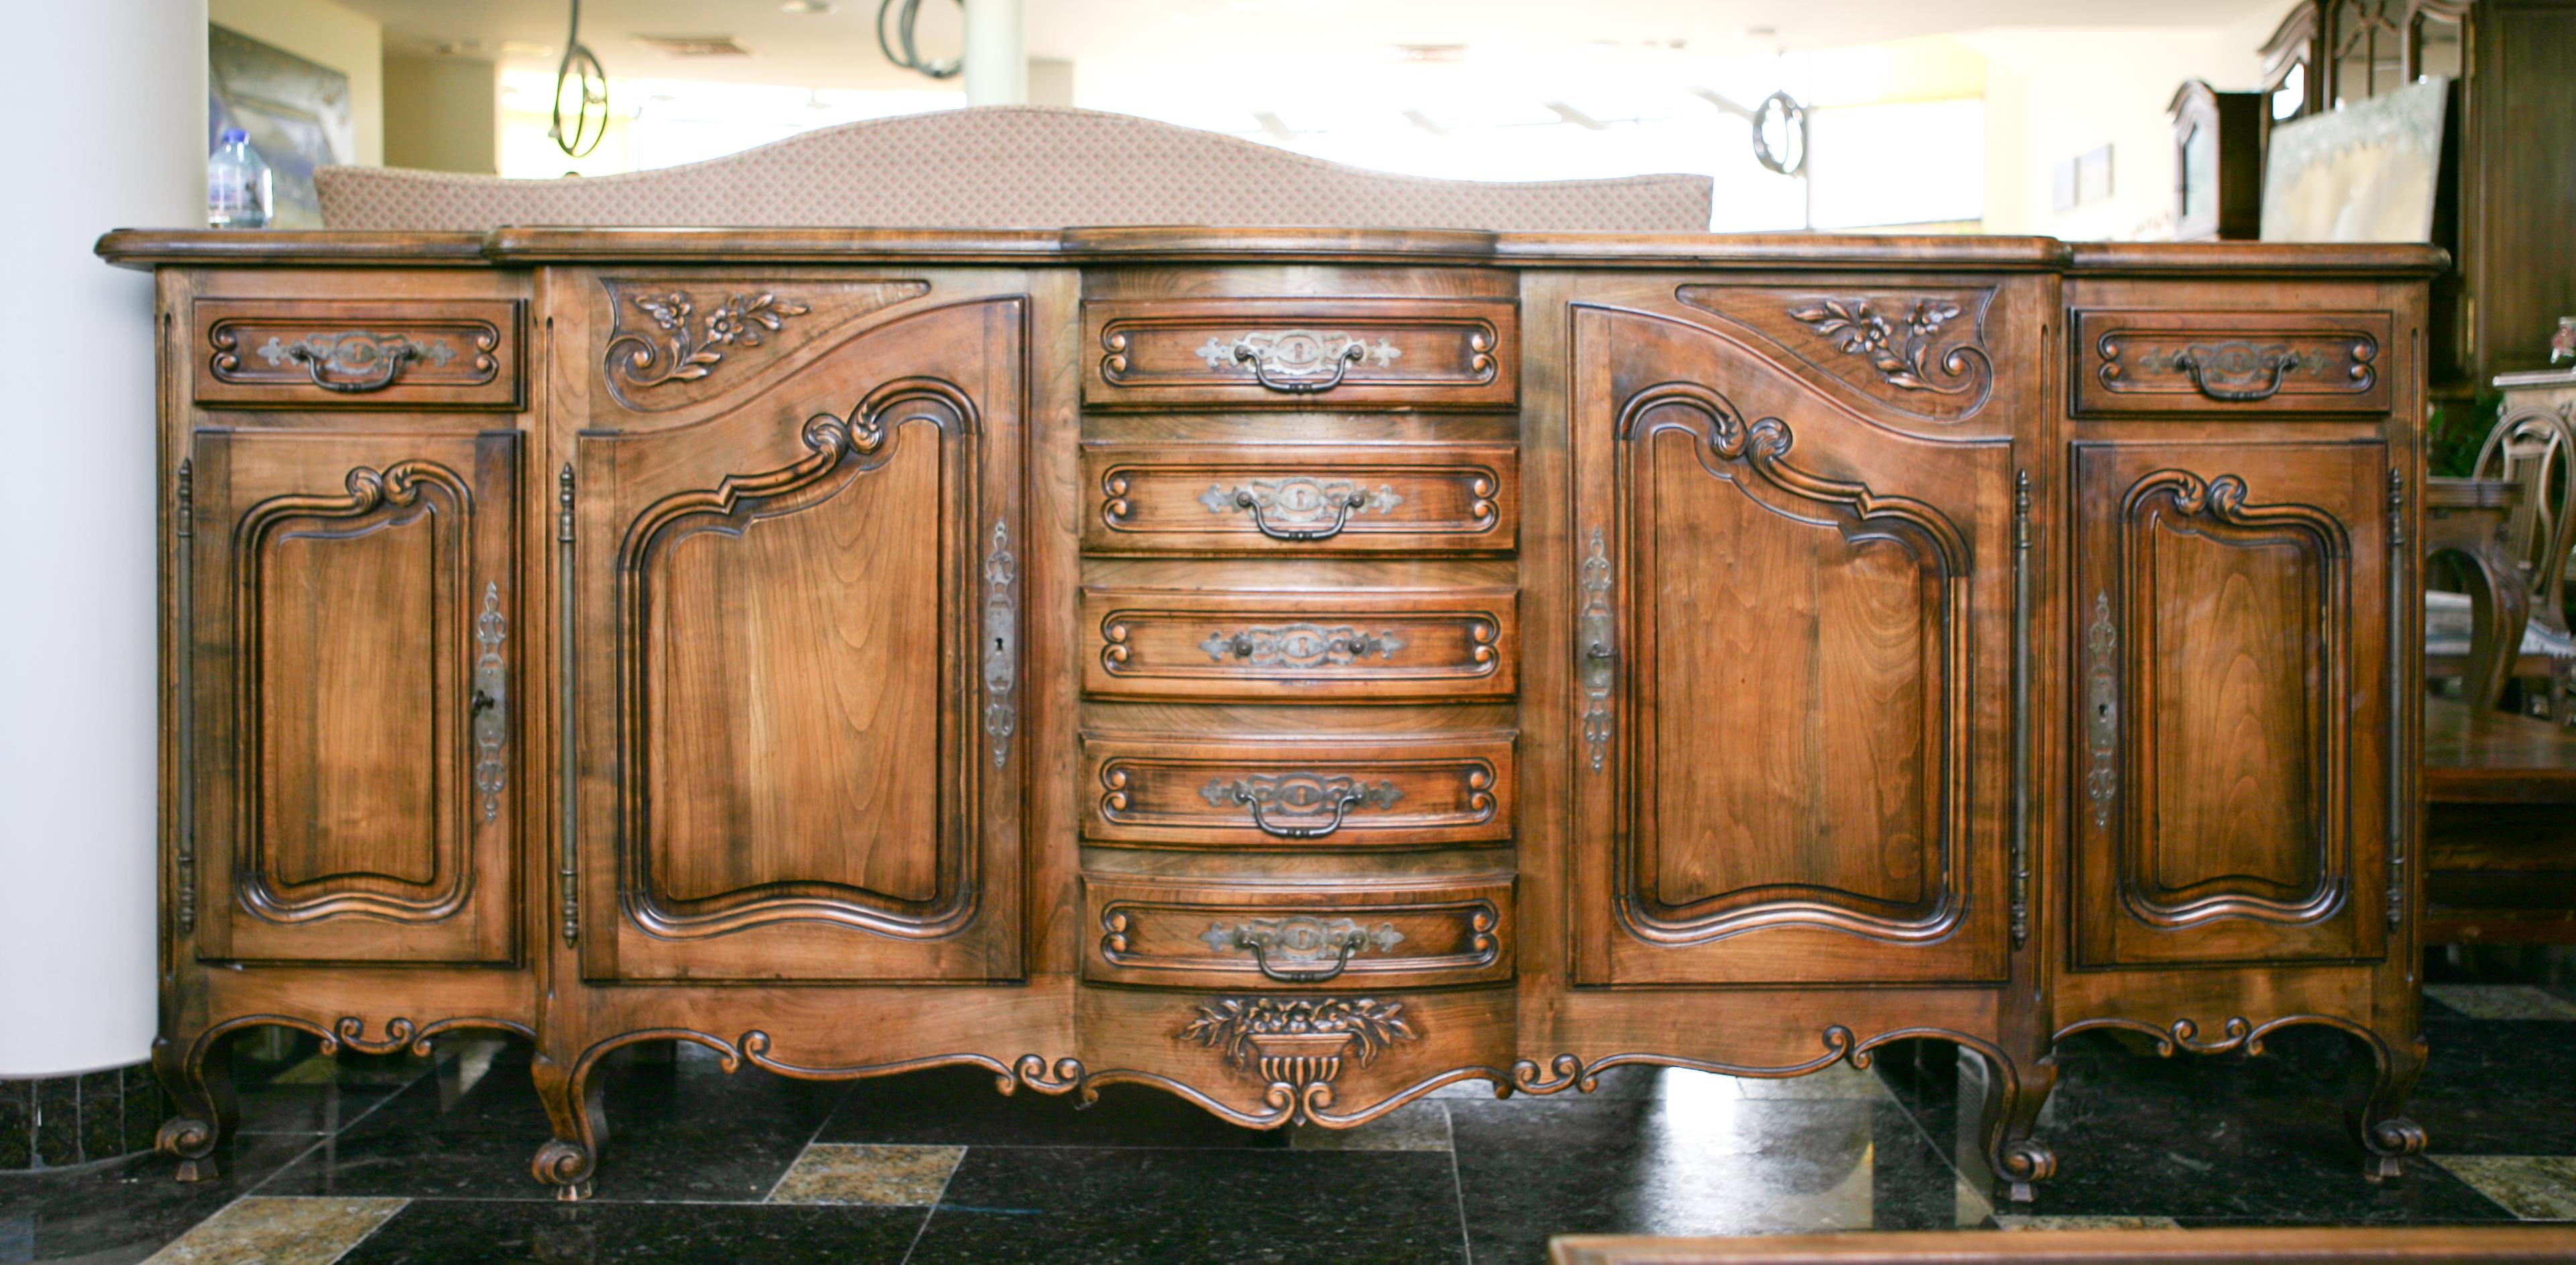 A beautiful antique French Louis XV style buffet, circa 1870.
Made of solid oak with luscious curves and carving. The marquetry top has a lively undulating shape across the front. Placed exactly in the center of the buffet are five drawers one